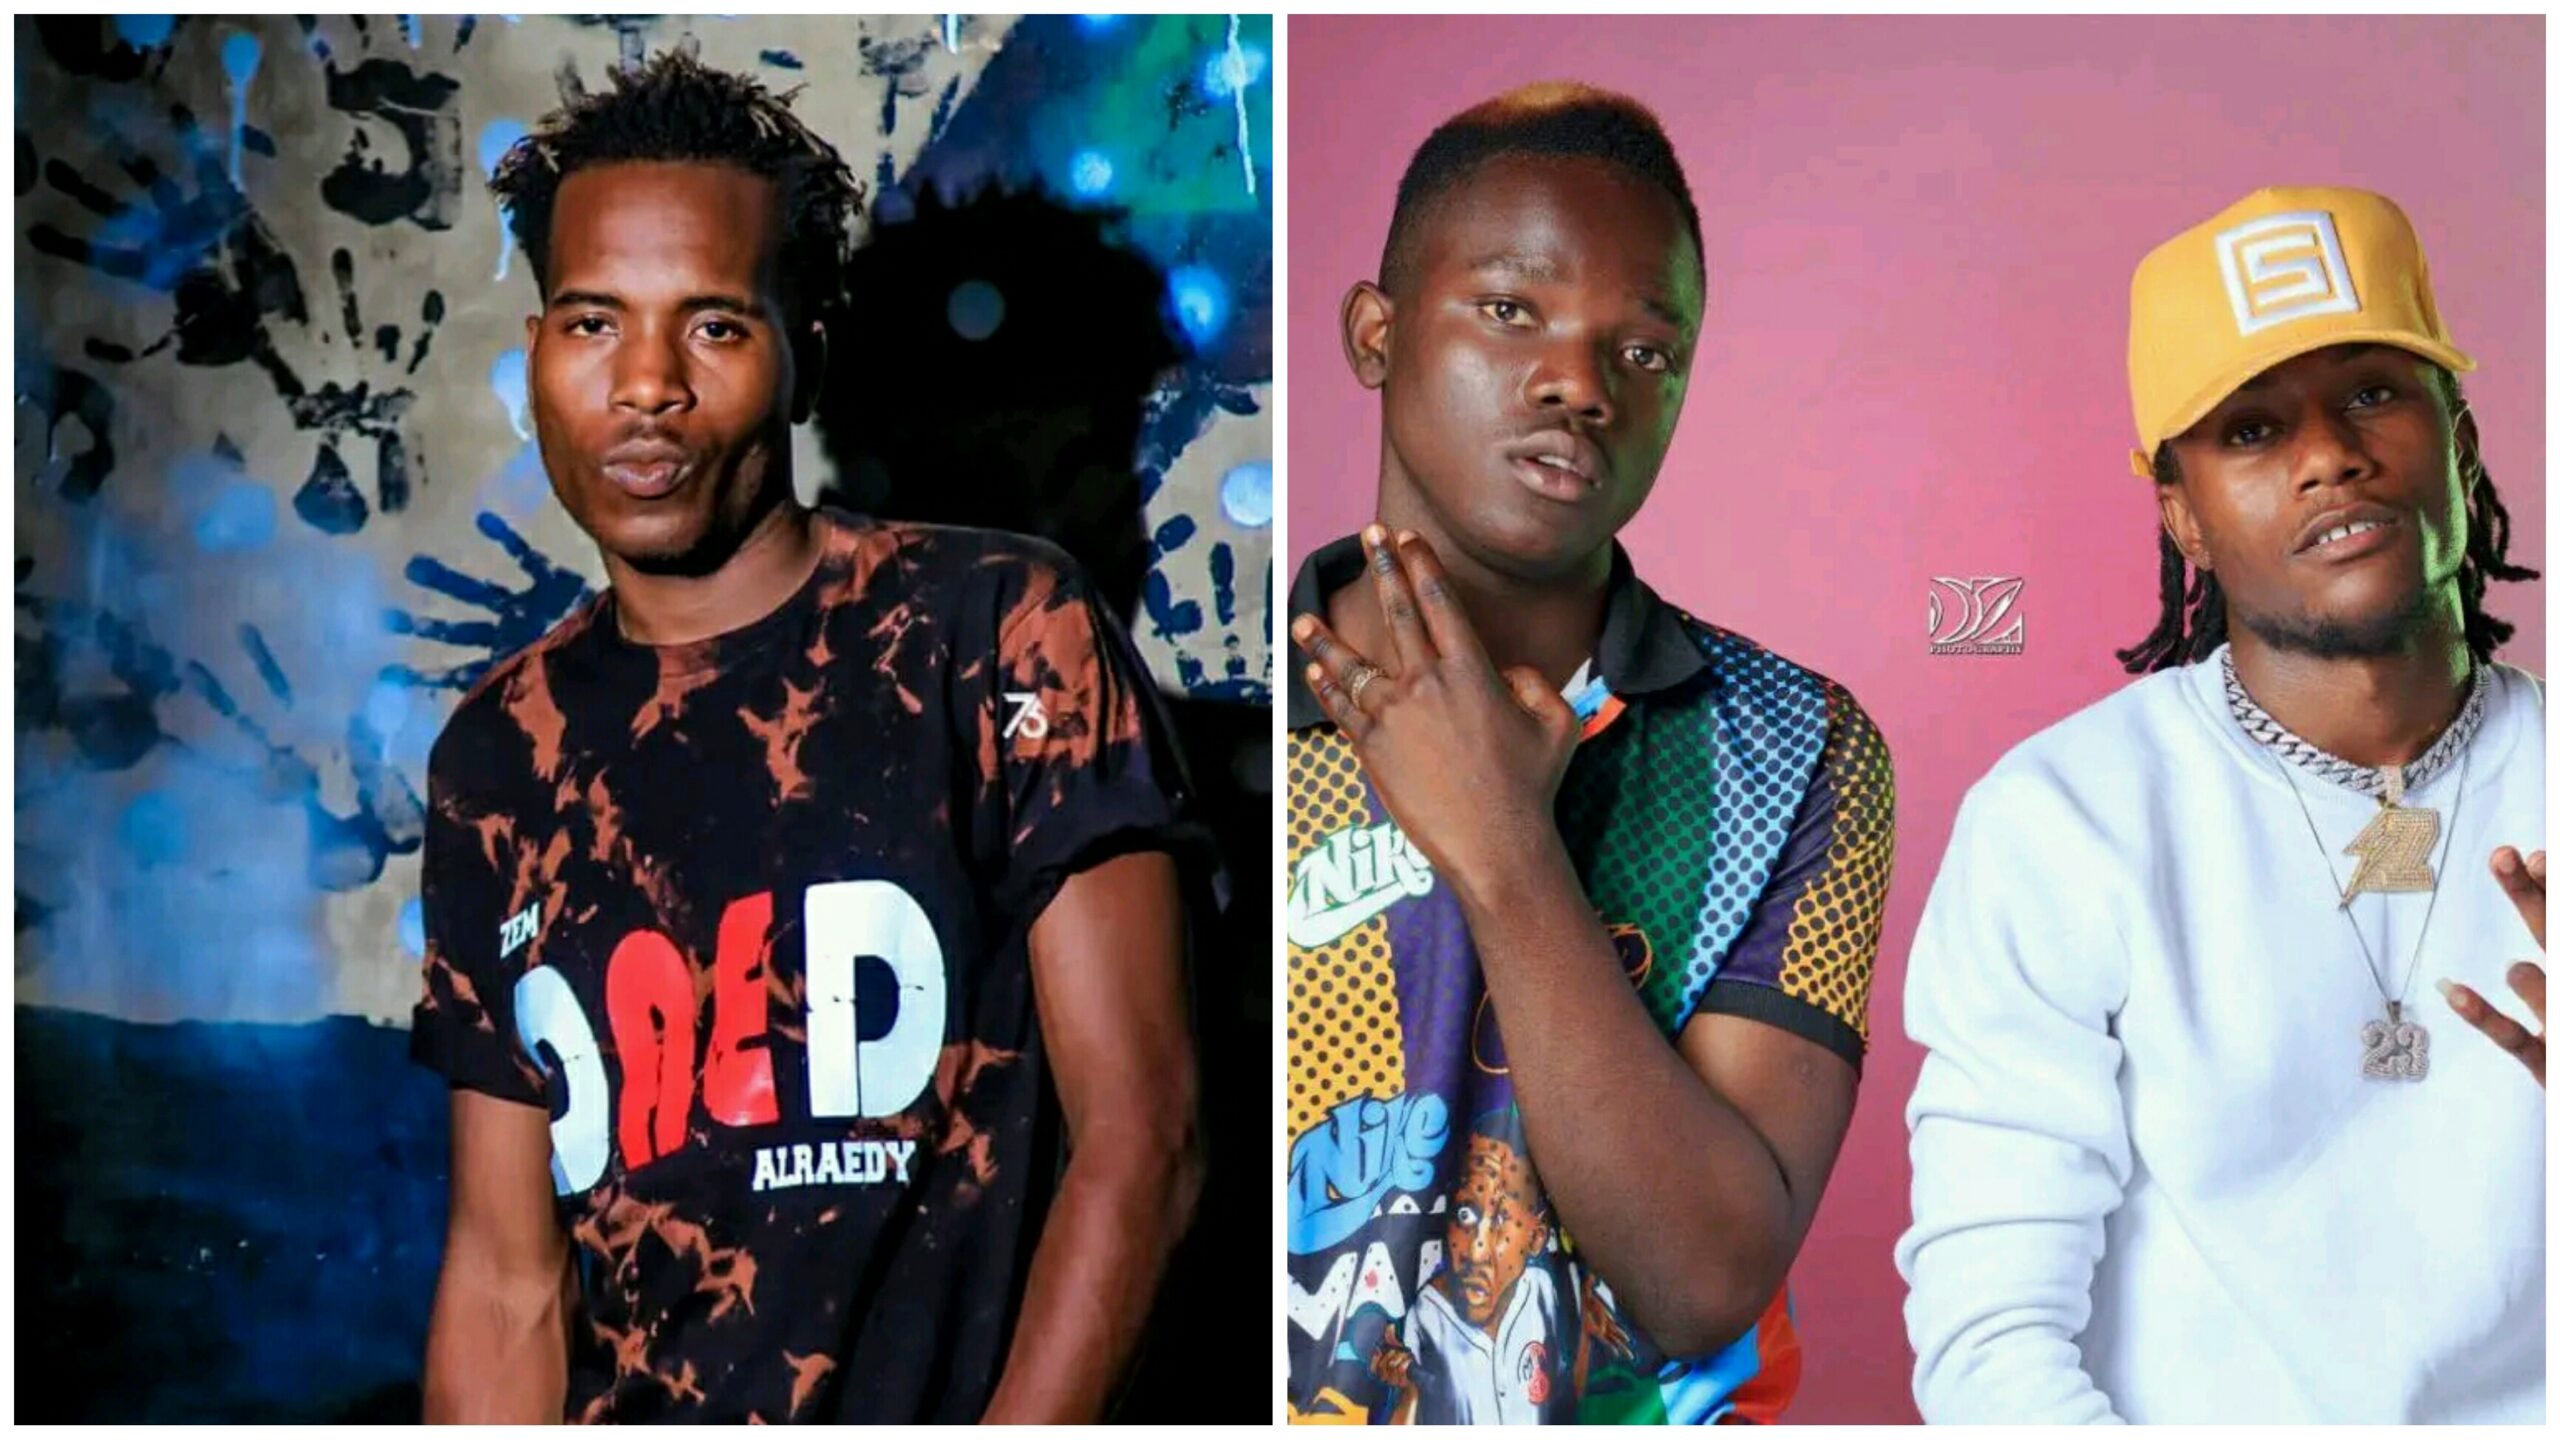 Watch: Y Celeb Disses 4 Na 5